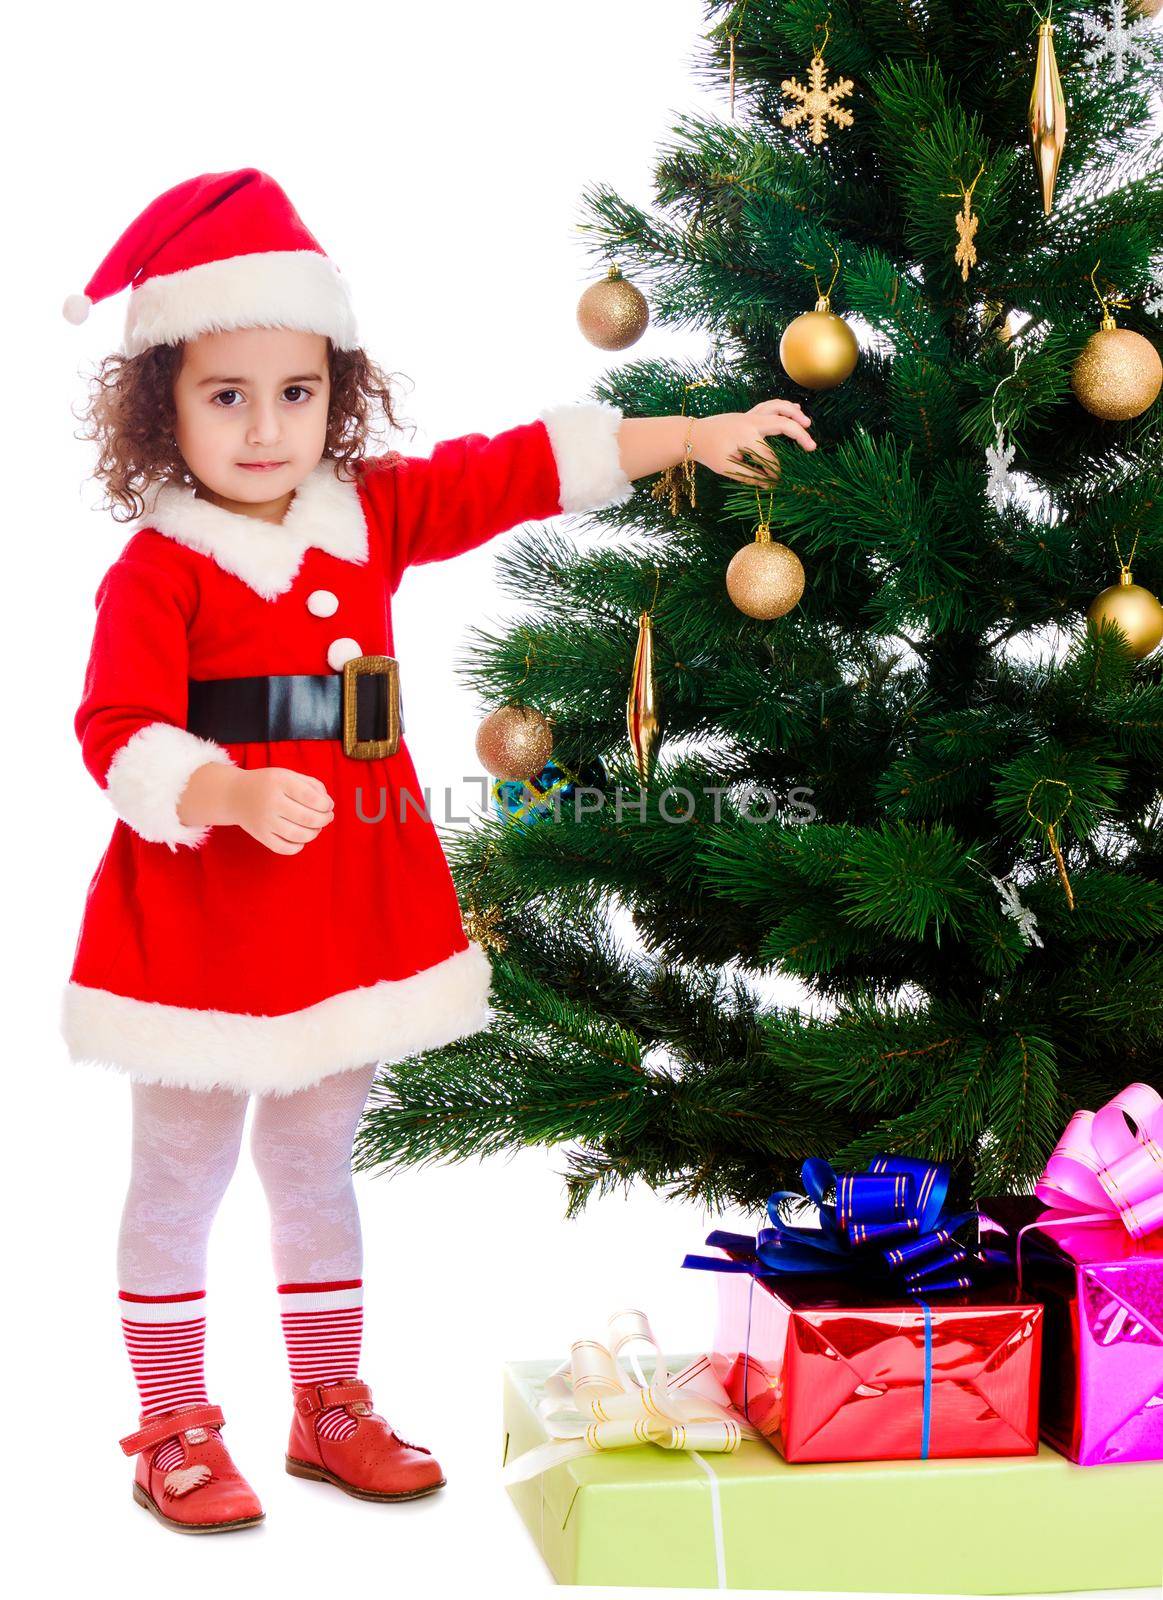 Adorable little curly-haired girl, dressed as Santa Claus decorates a Christmas tree toys.Isolated on white background.